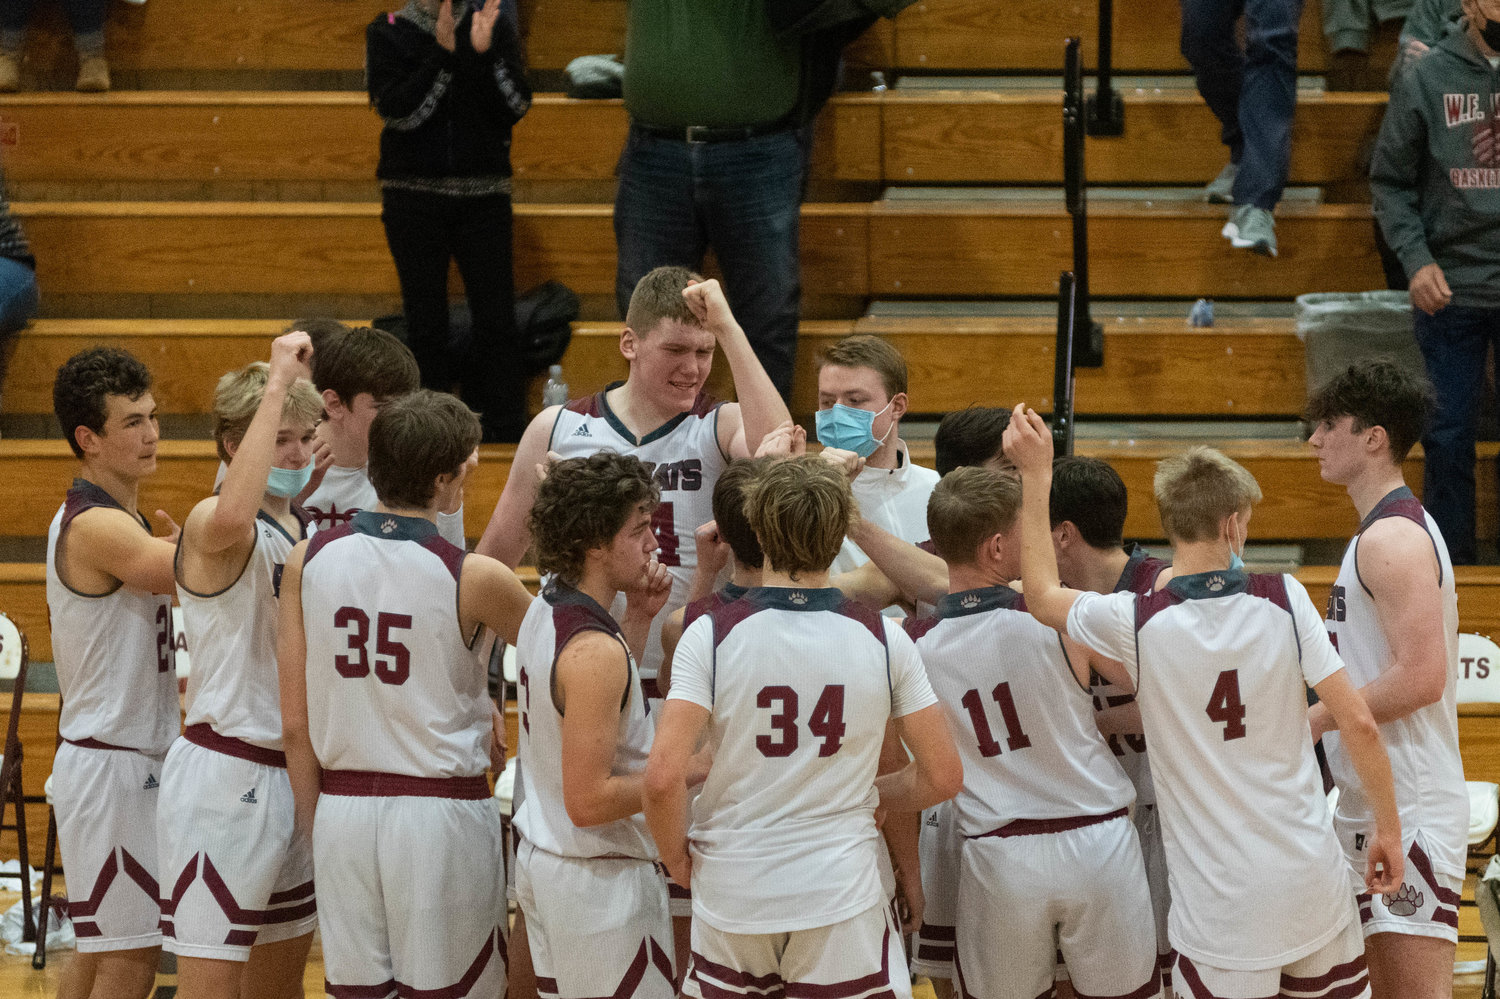 Bearcats Celebrate after win over Tumwater in Chehalis Jan. 25